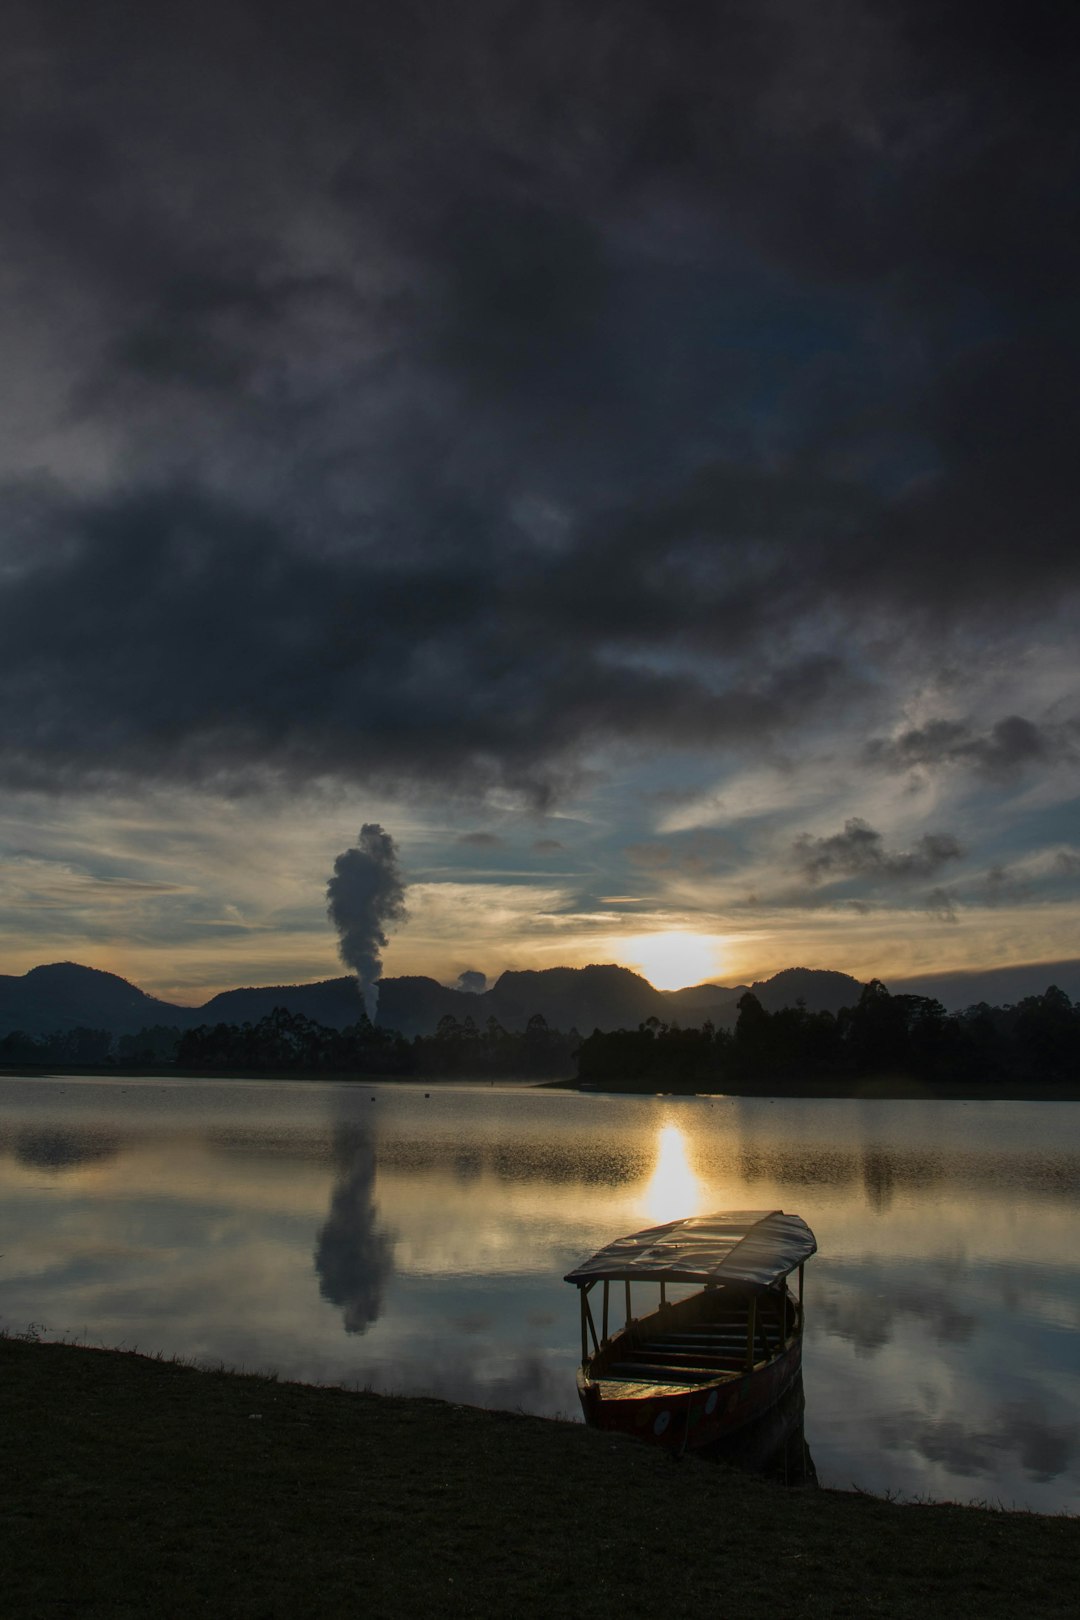 travelers stories about Loch in Bandung, Indonesia